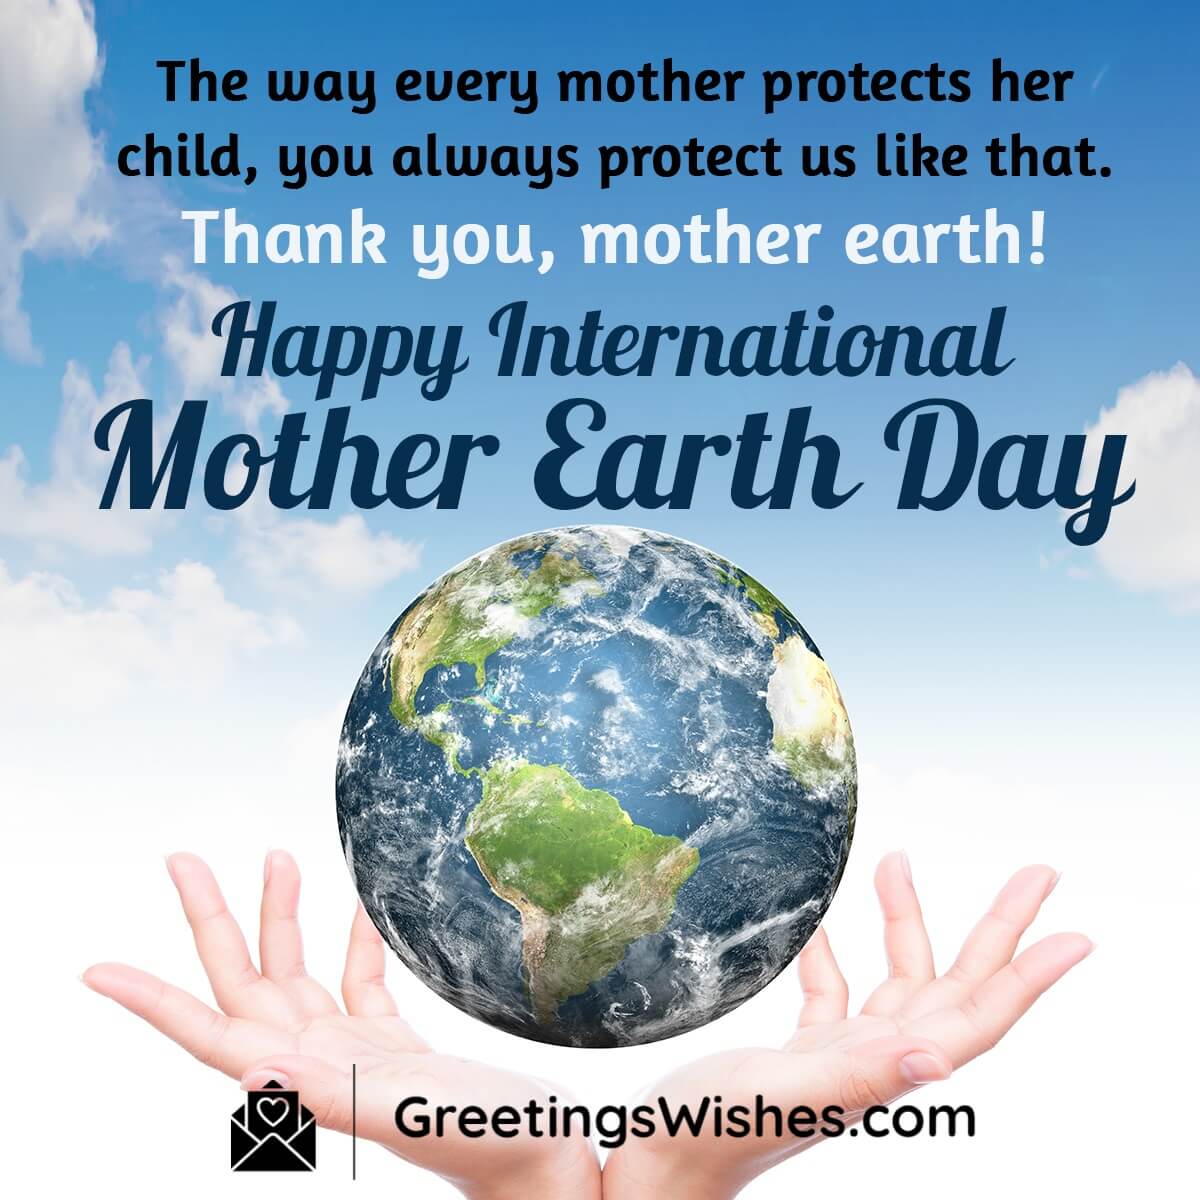 International Mother Earth Day Status Image